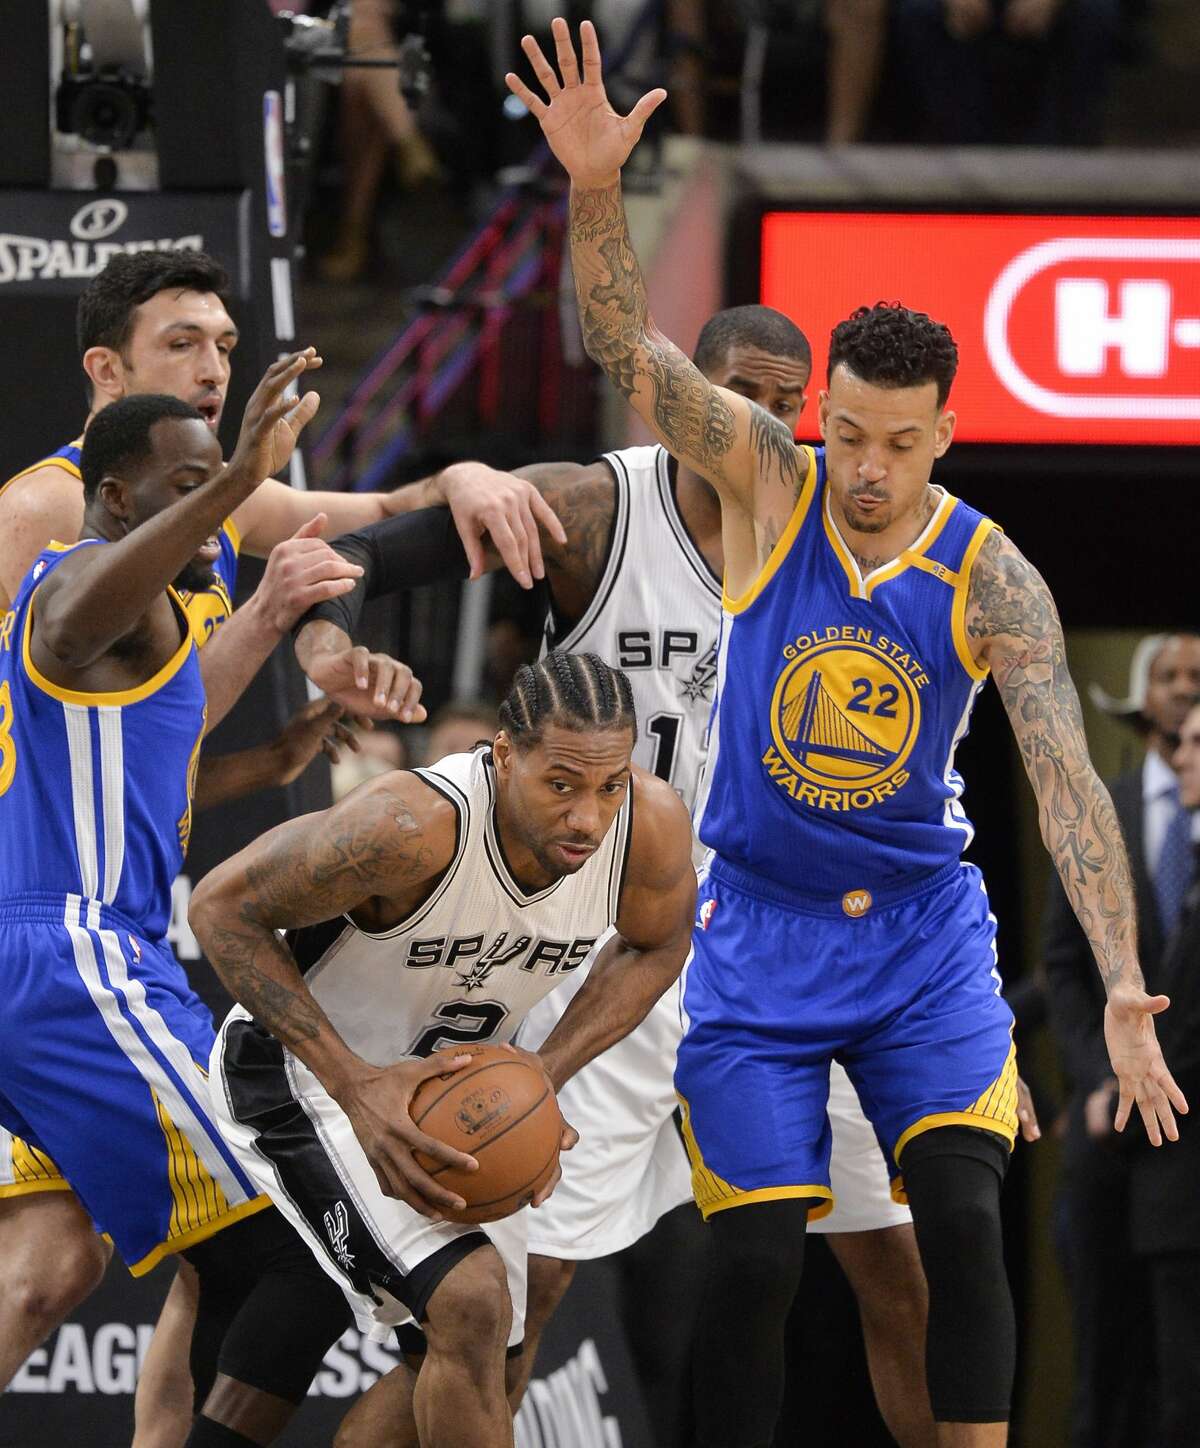 San Antonio Spurs forward Kawhi Leonard (2) looks to pass as he is defended by Golden State Warriors' Matt Barnes (22) and Draymond Green, left, during the first half of an NBA basketball game, Wednesday, March 29, 2017, in San Antonio. (AP Photo/Darren Abate)